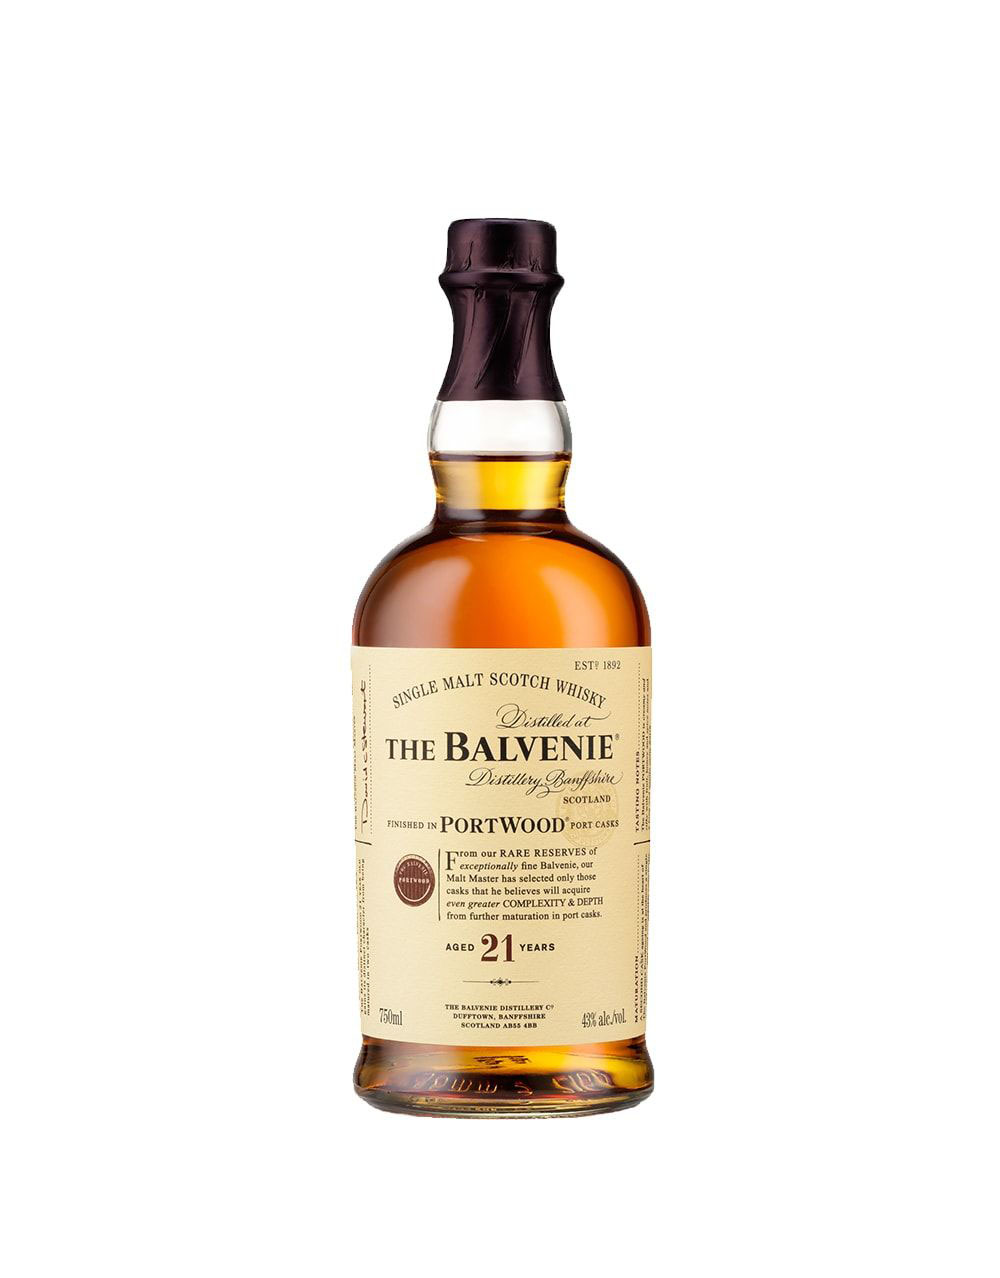 The Balvenie PortWood Aged 21 Years Scotch Whisky